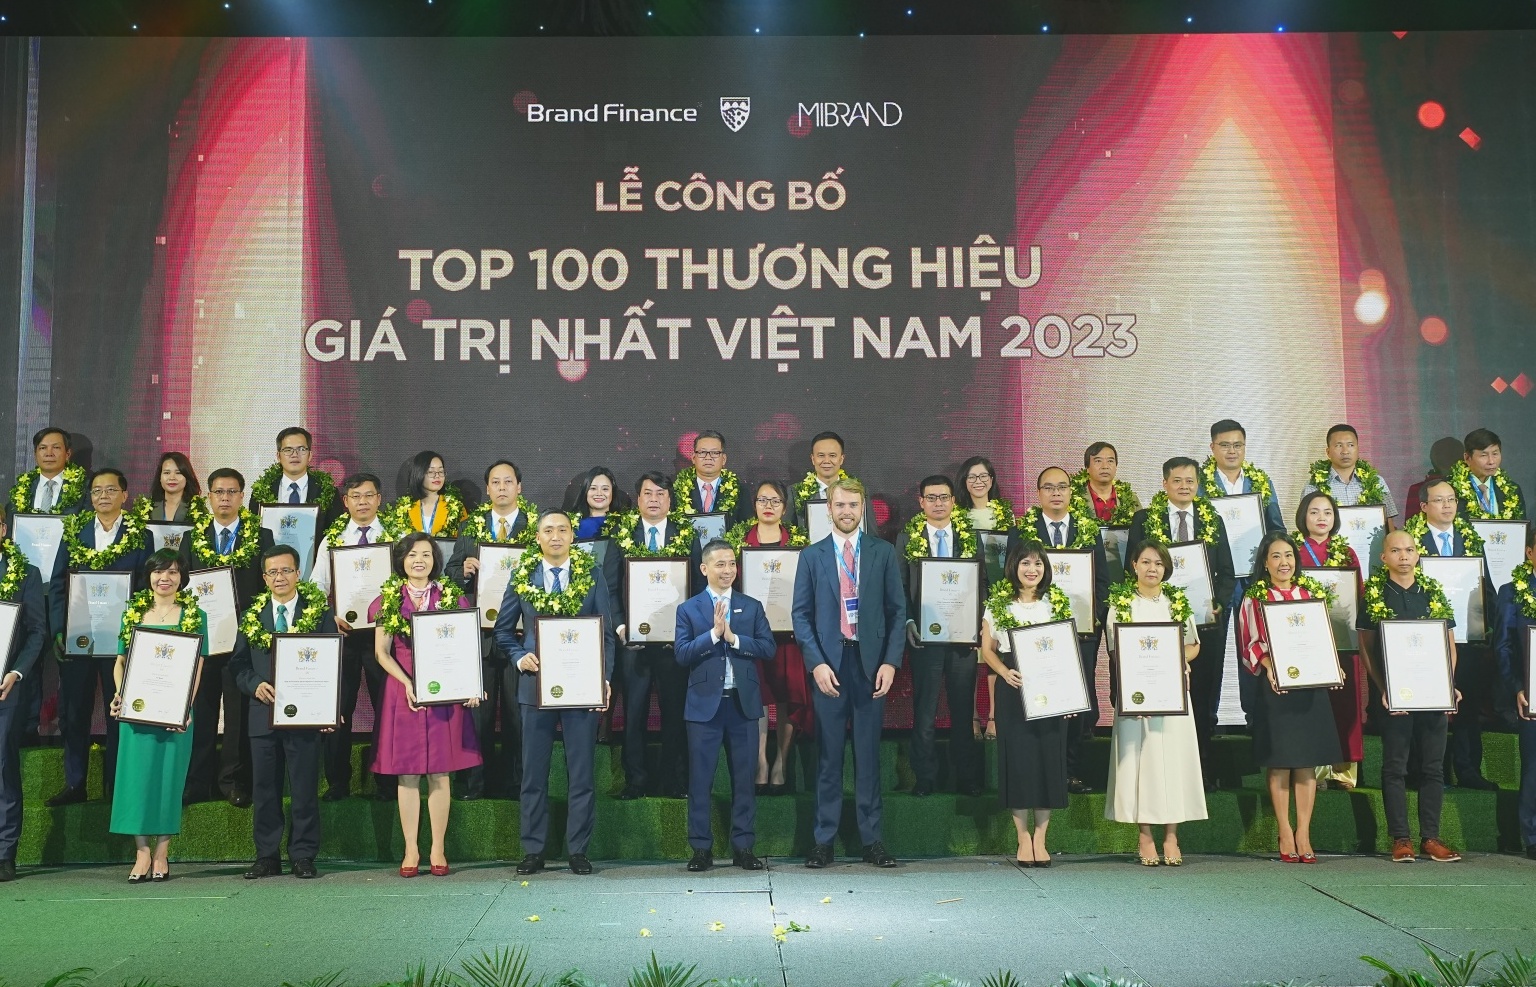 Honouring the 100 most valuable brands in Vietnam 2023